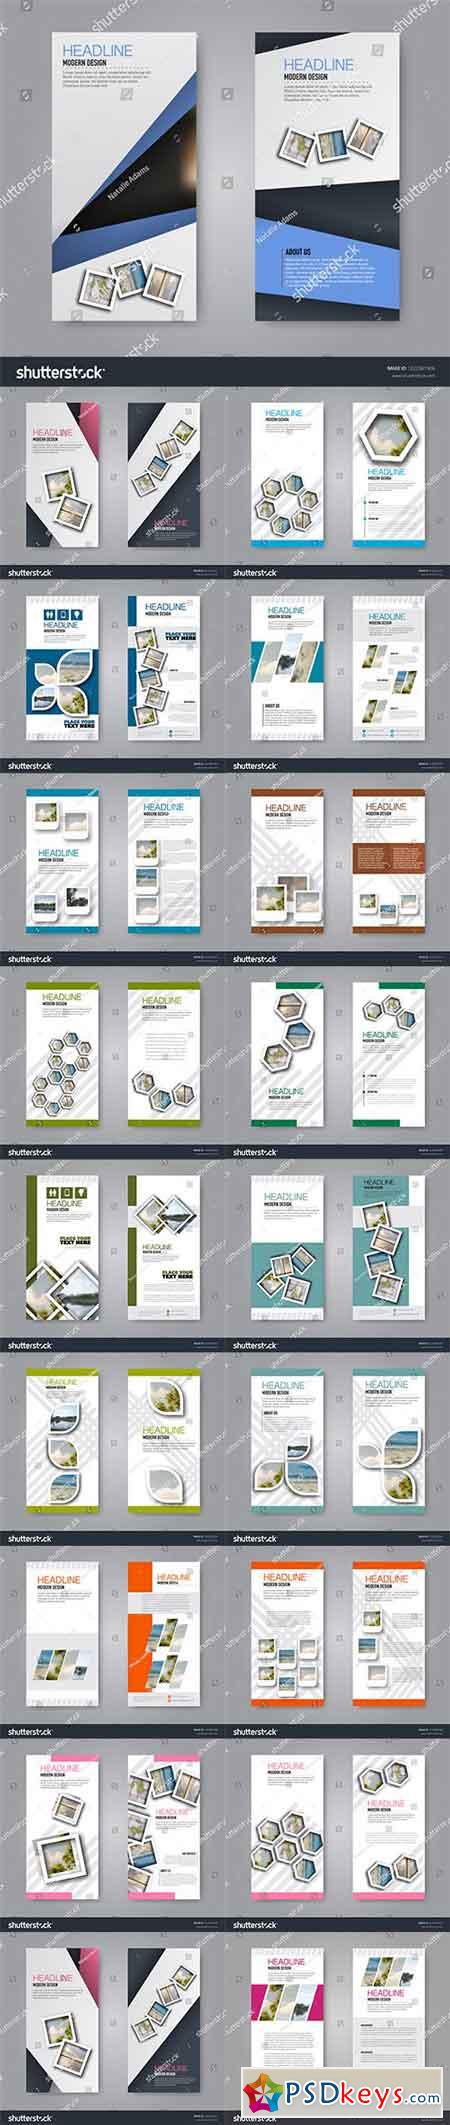 Flyer and leaflet design. Scale to any size without loss of resolution